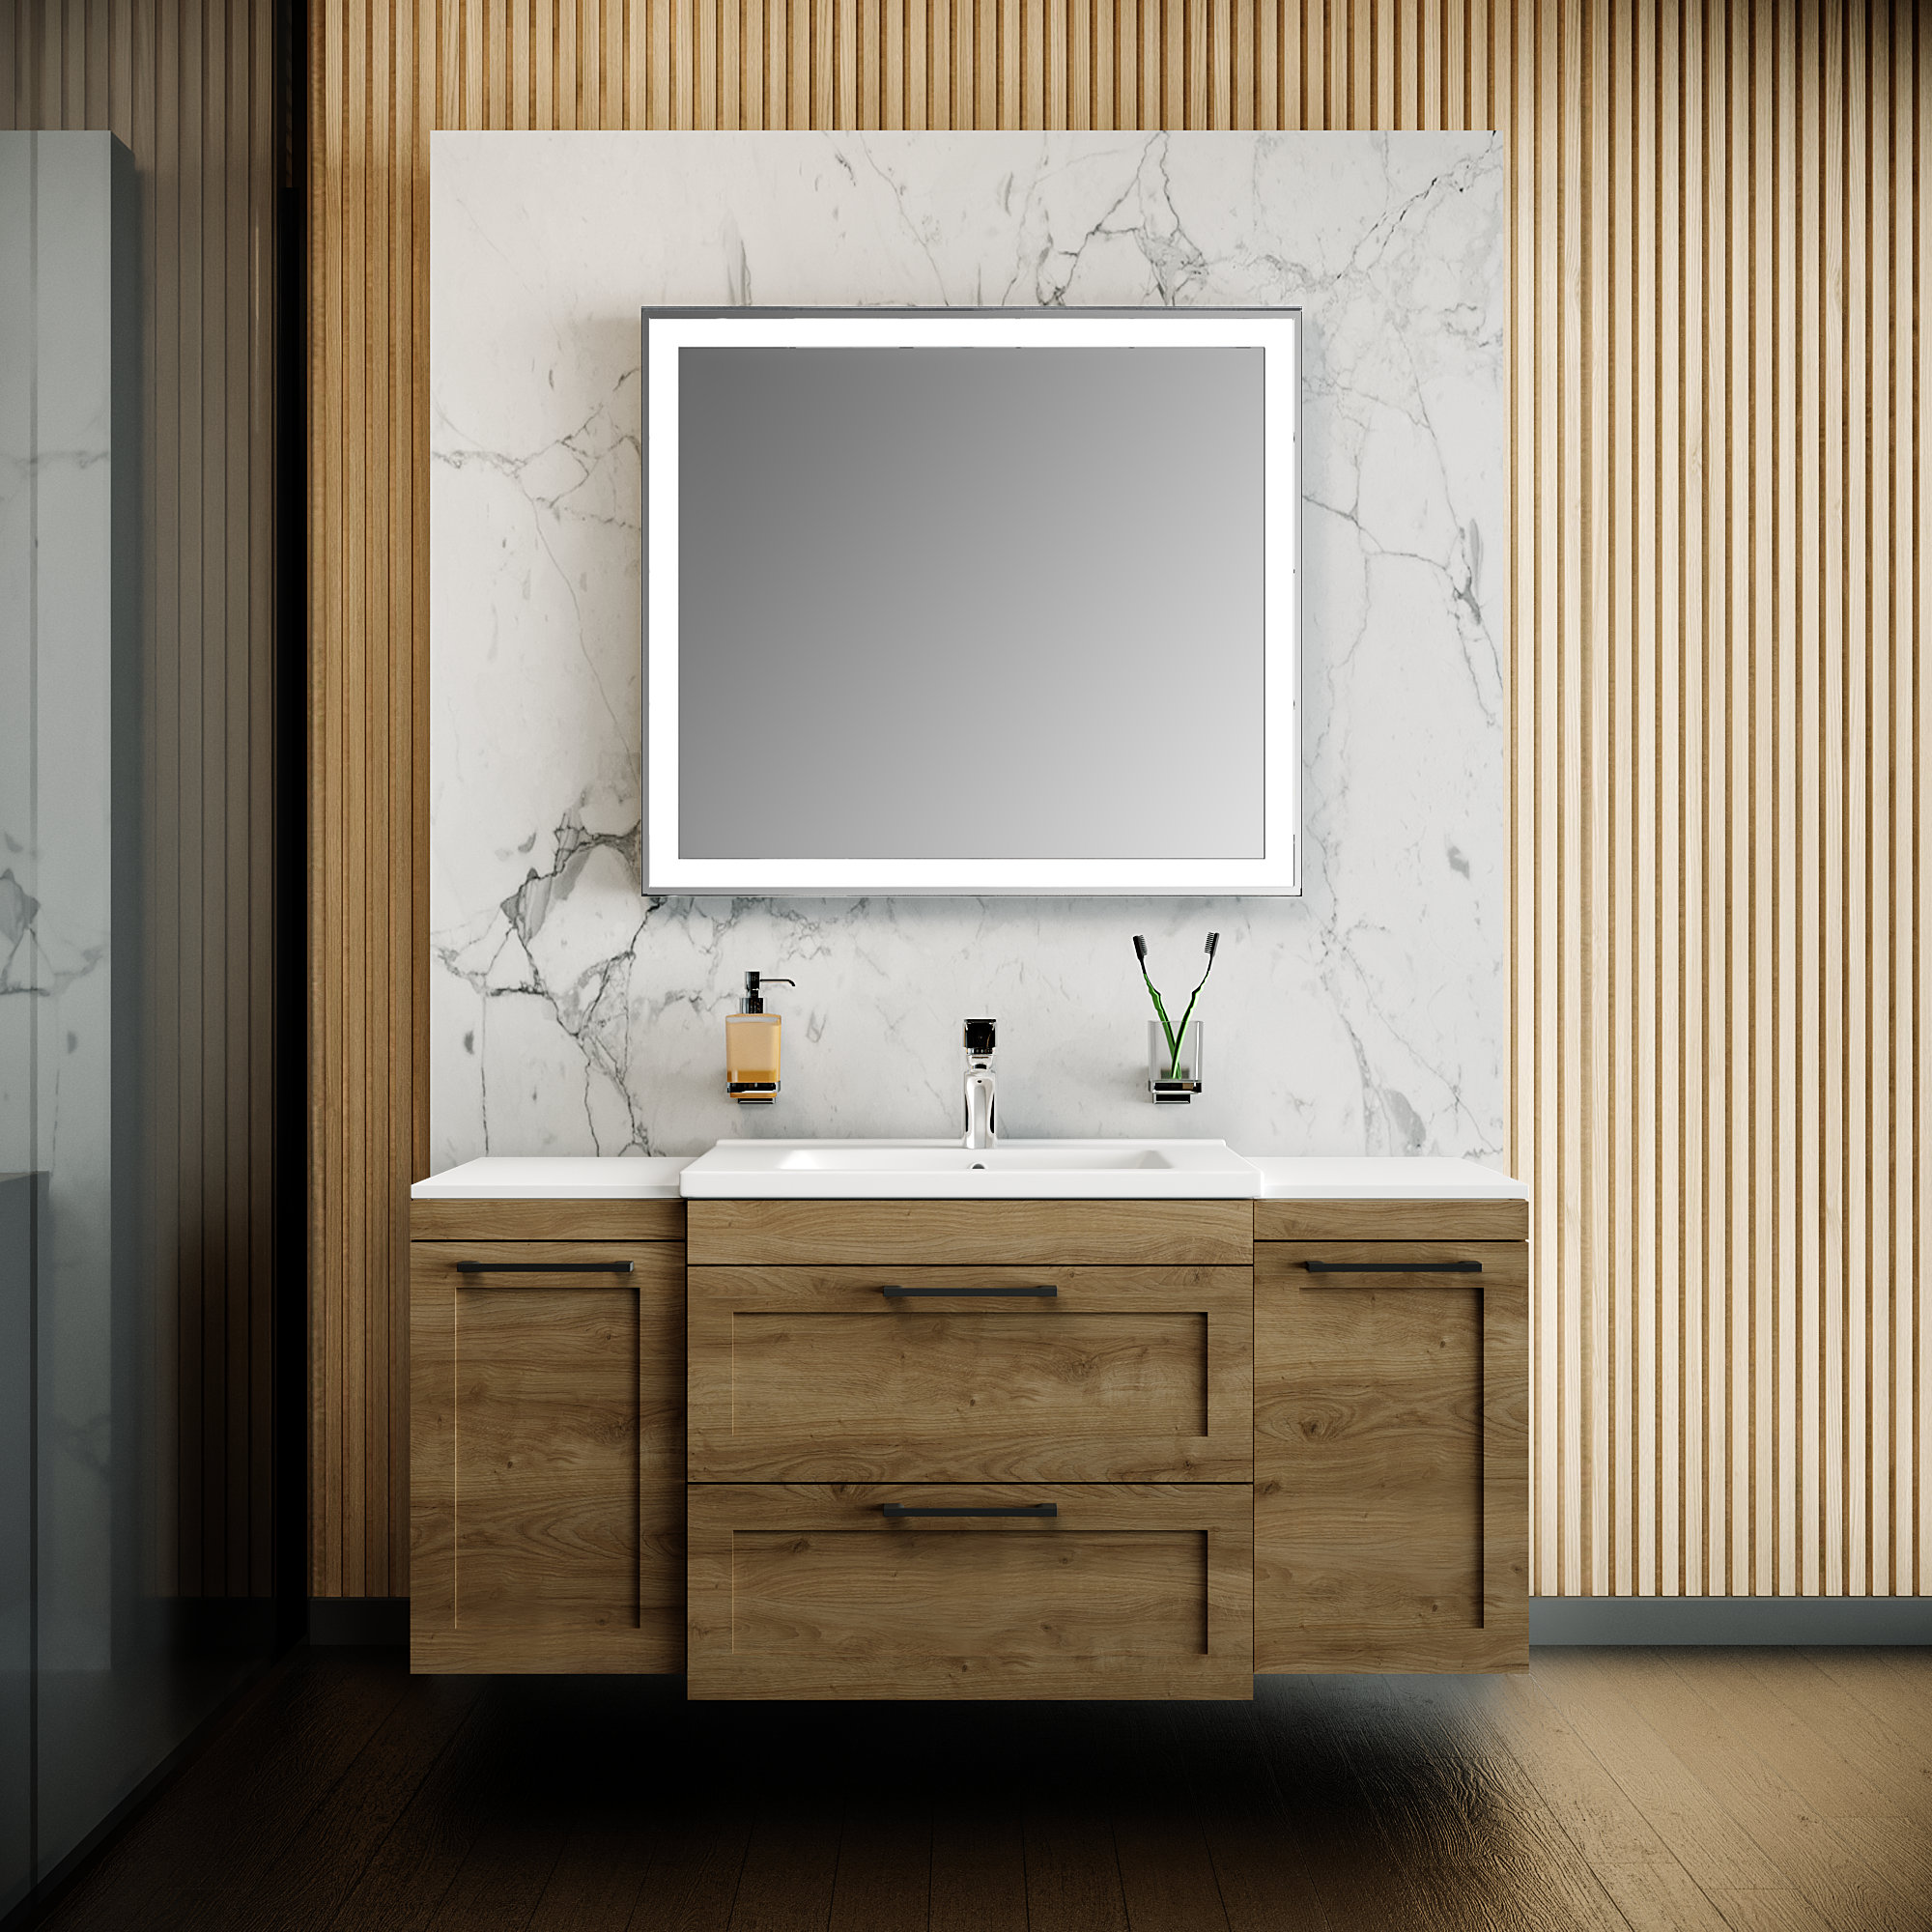 Natural Bamboo Bathroom Cabinets - Omega Cabinetry